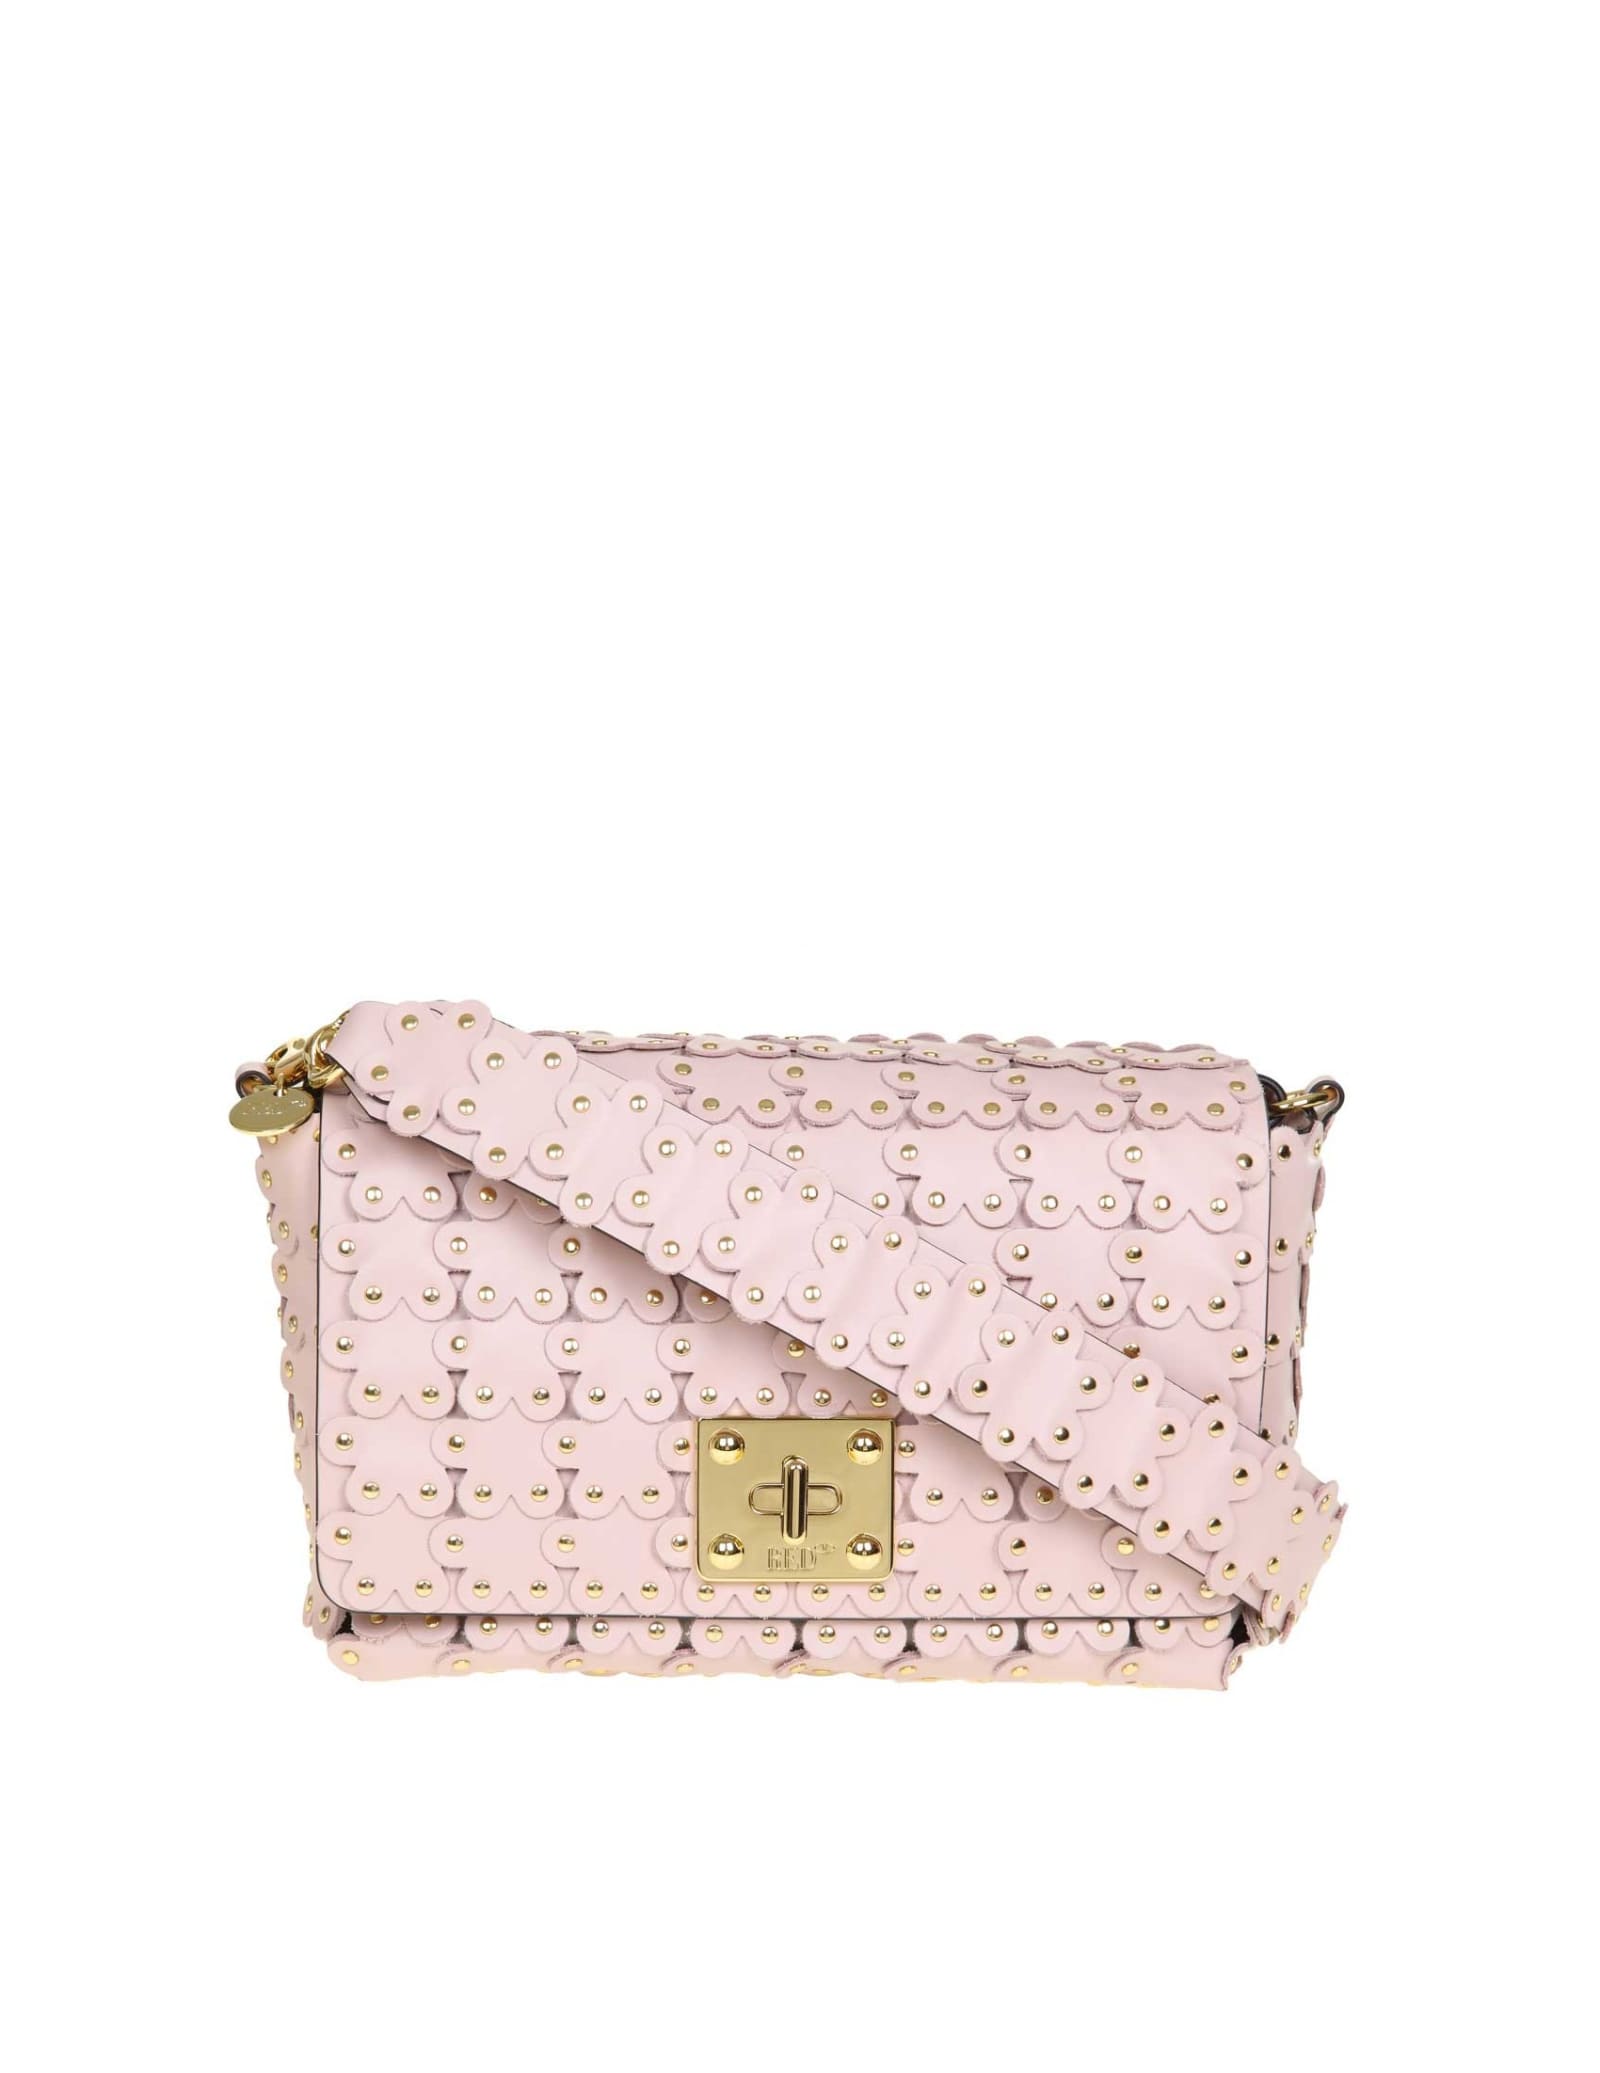 RED VALENTINO RED VALENTINO SHOULDER BAG WITH MICRO STUDS IN LEATHER,11219710